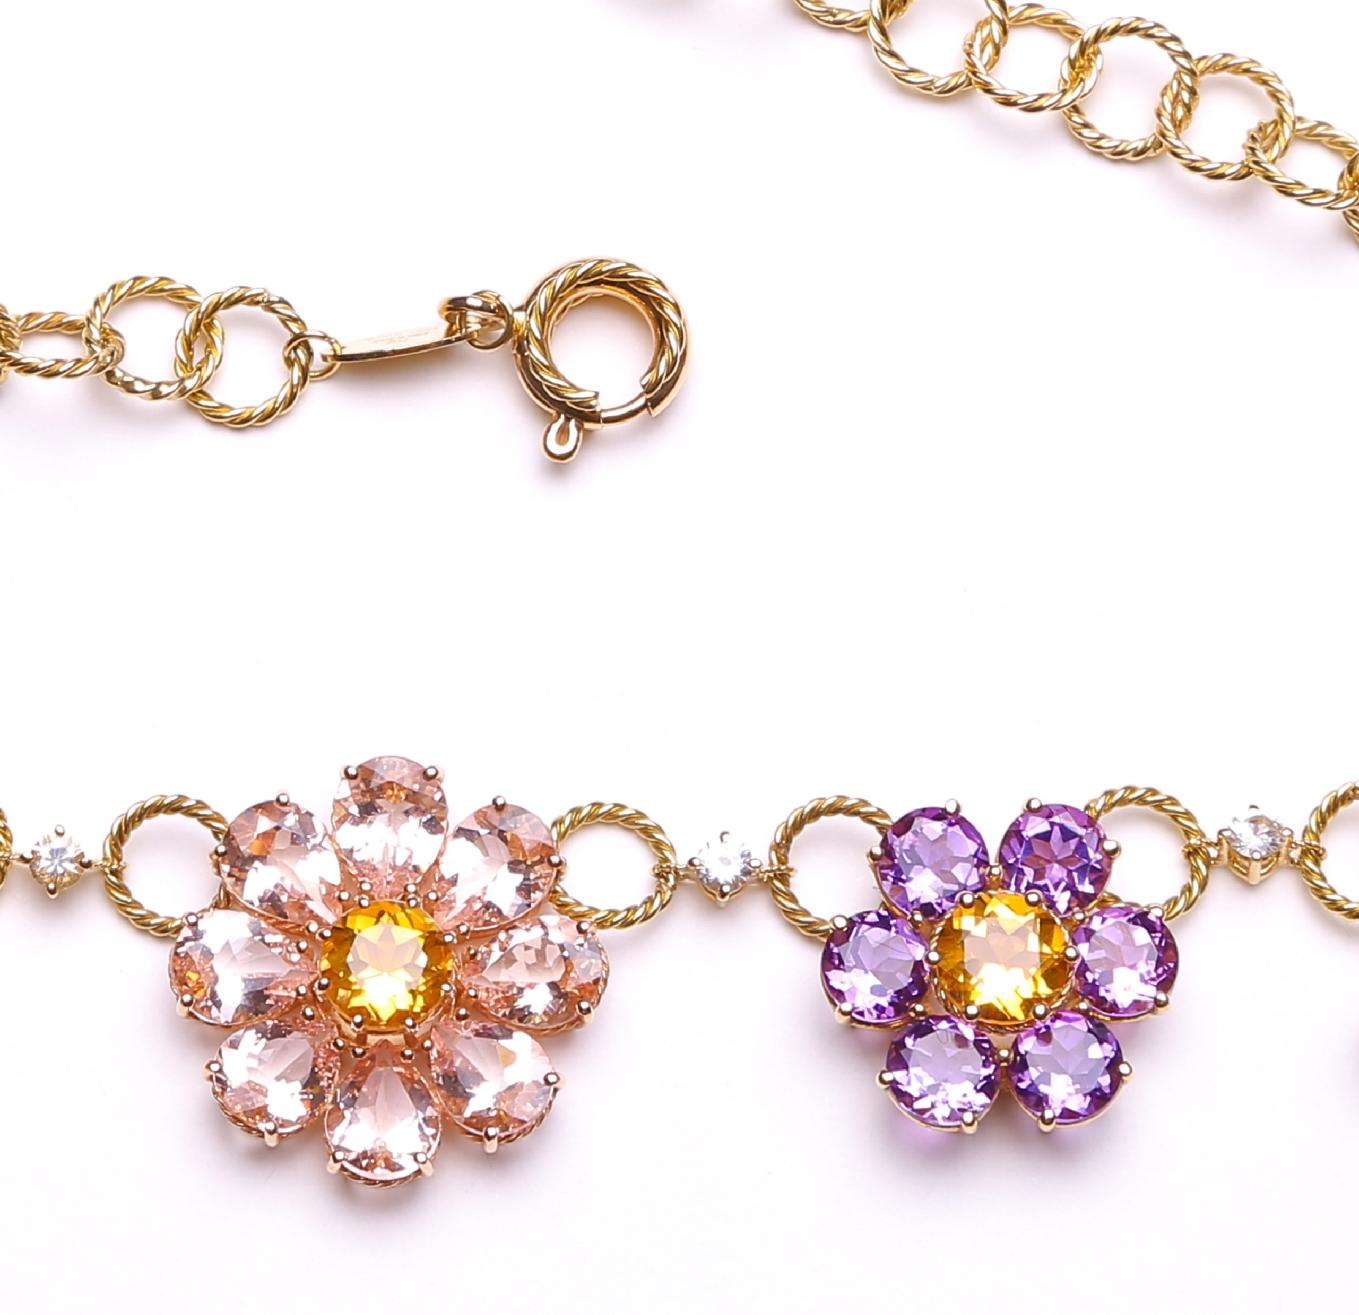 Dolce & Gabbana, Rare Amazing Gold and Multi Gem Set Floral Necklace For Sale 7